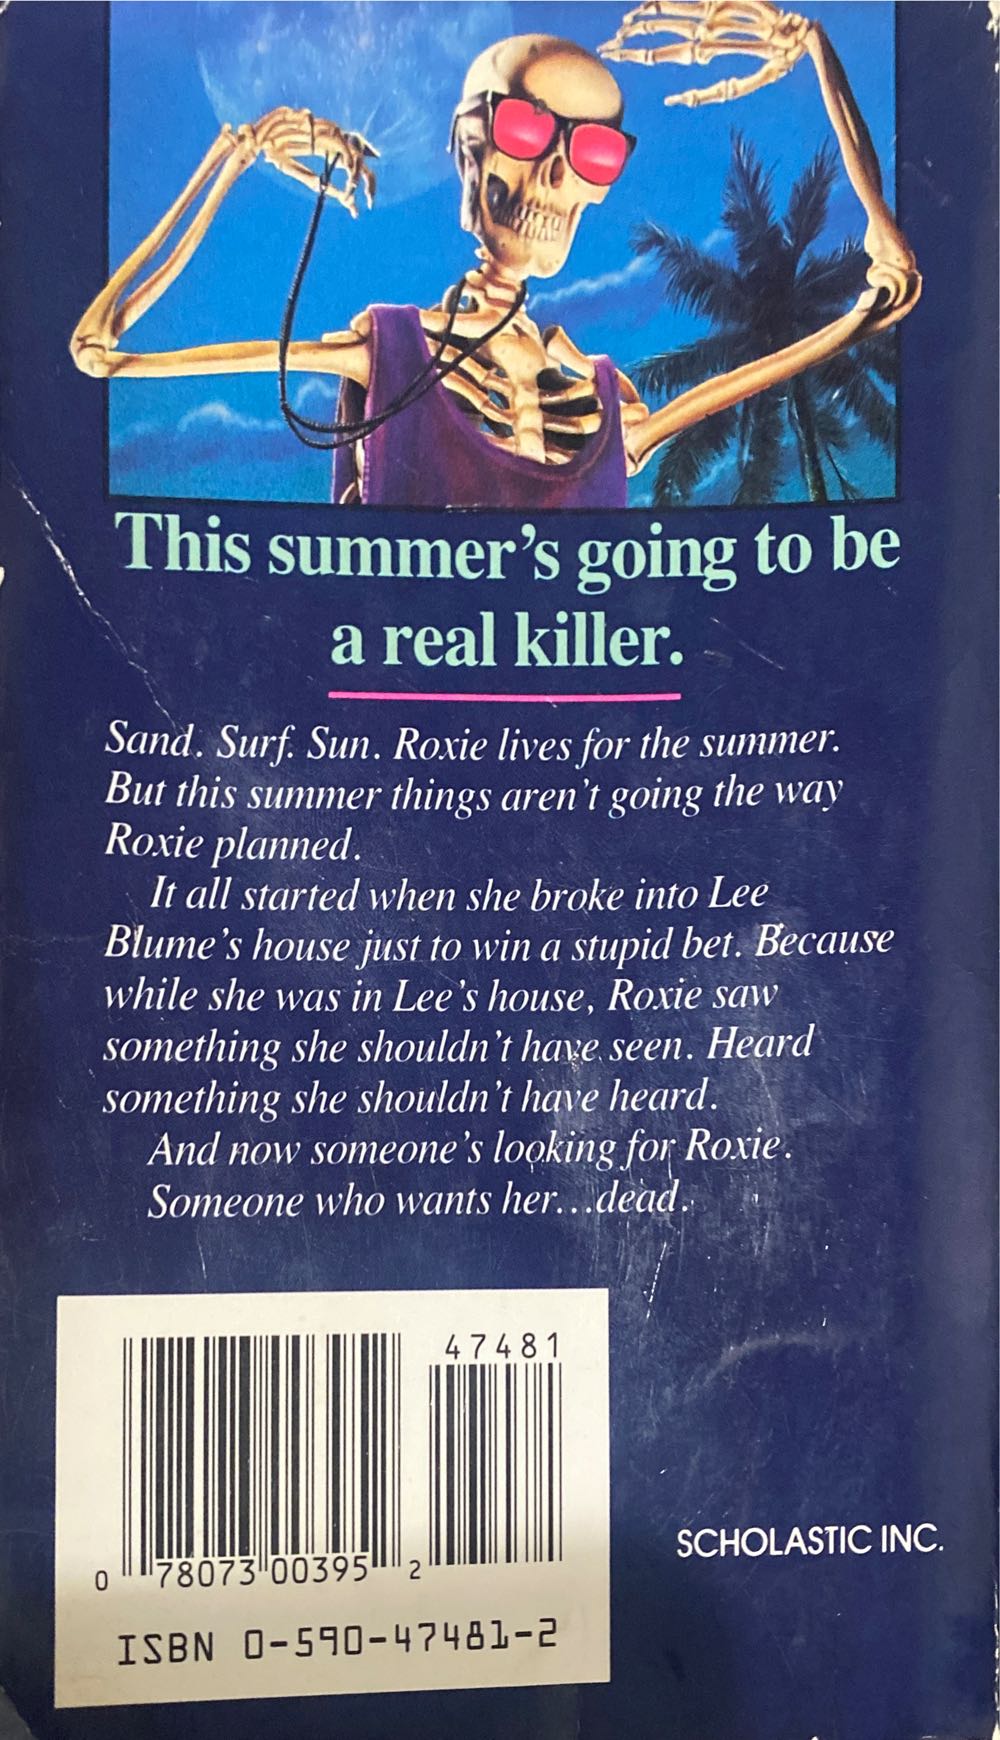 I Saw You That Night - R.L. Stine (Scholastic - Paperback) book collectible [Barcode 9780590474818] - Main Image 4